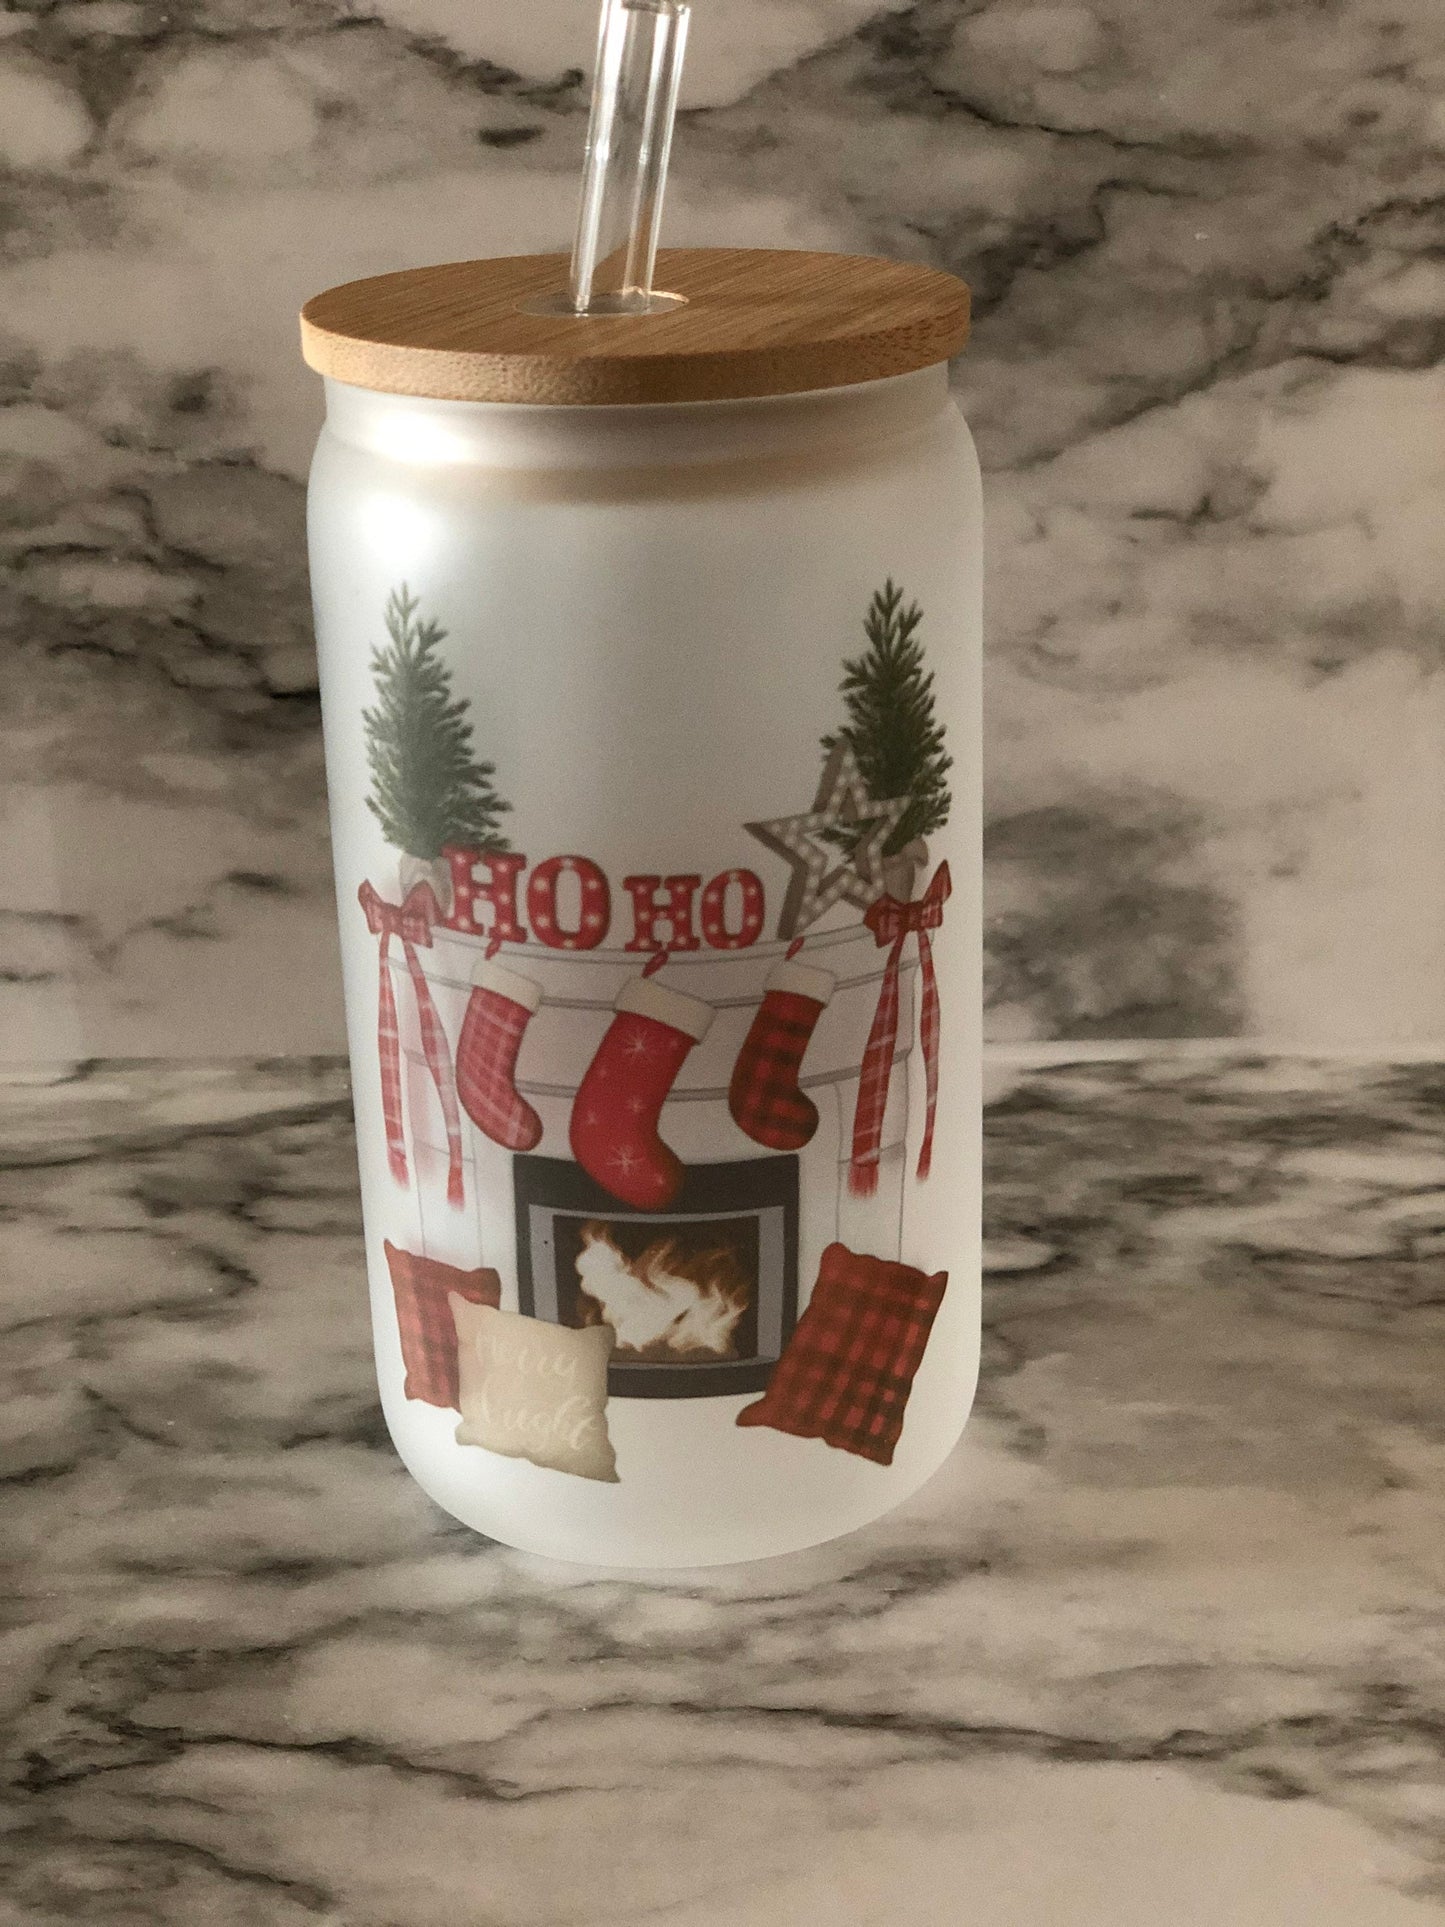 Wonderful Time of the Year Christmas 13oz Beer Can Glass Cup